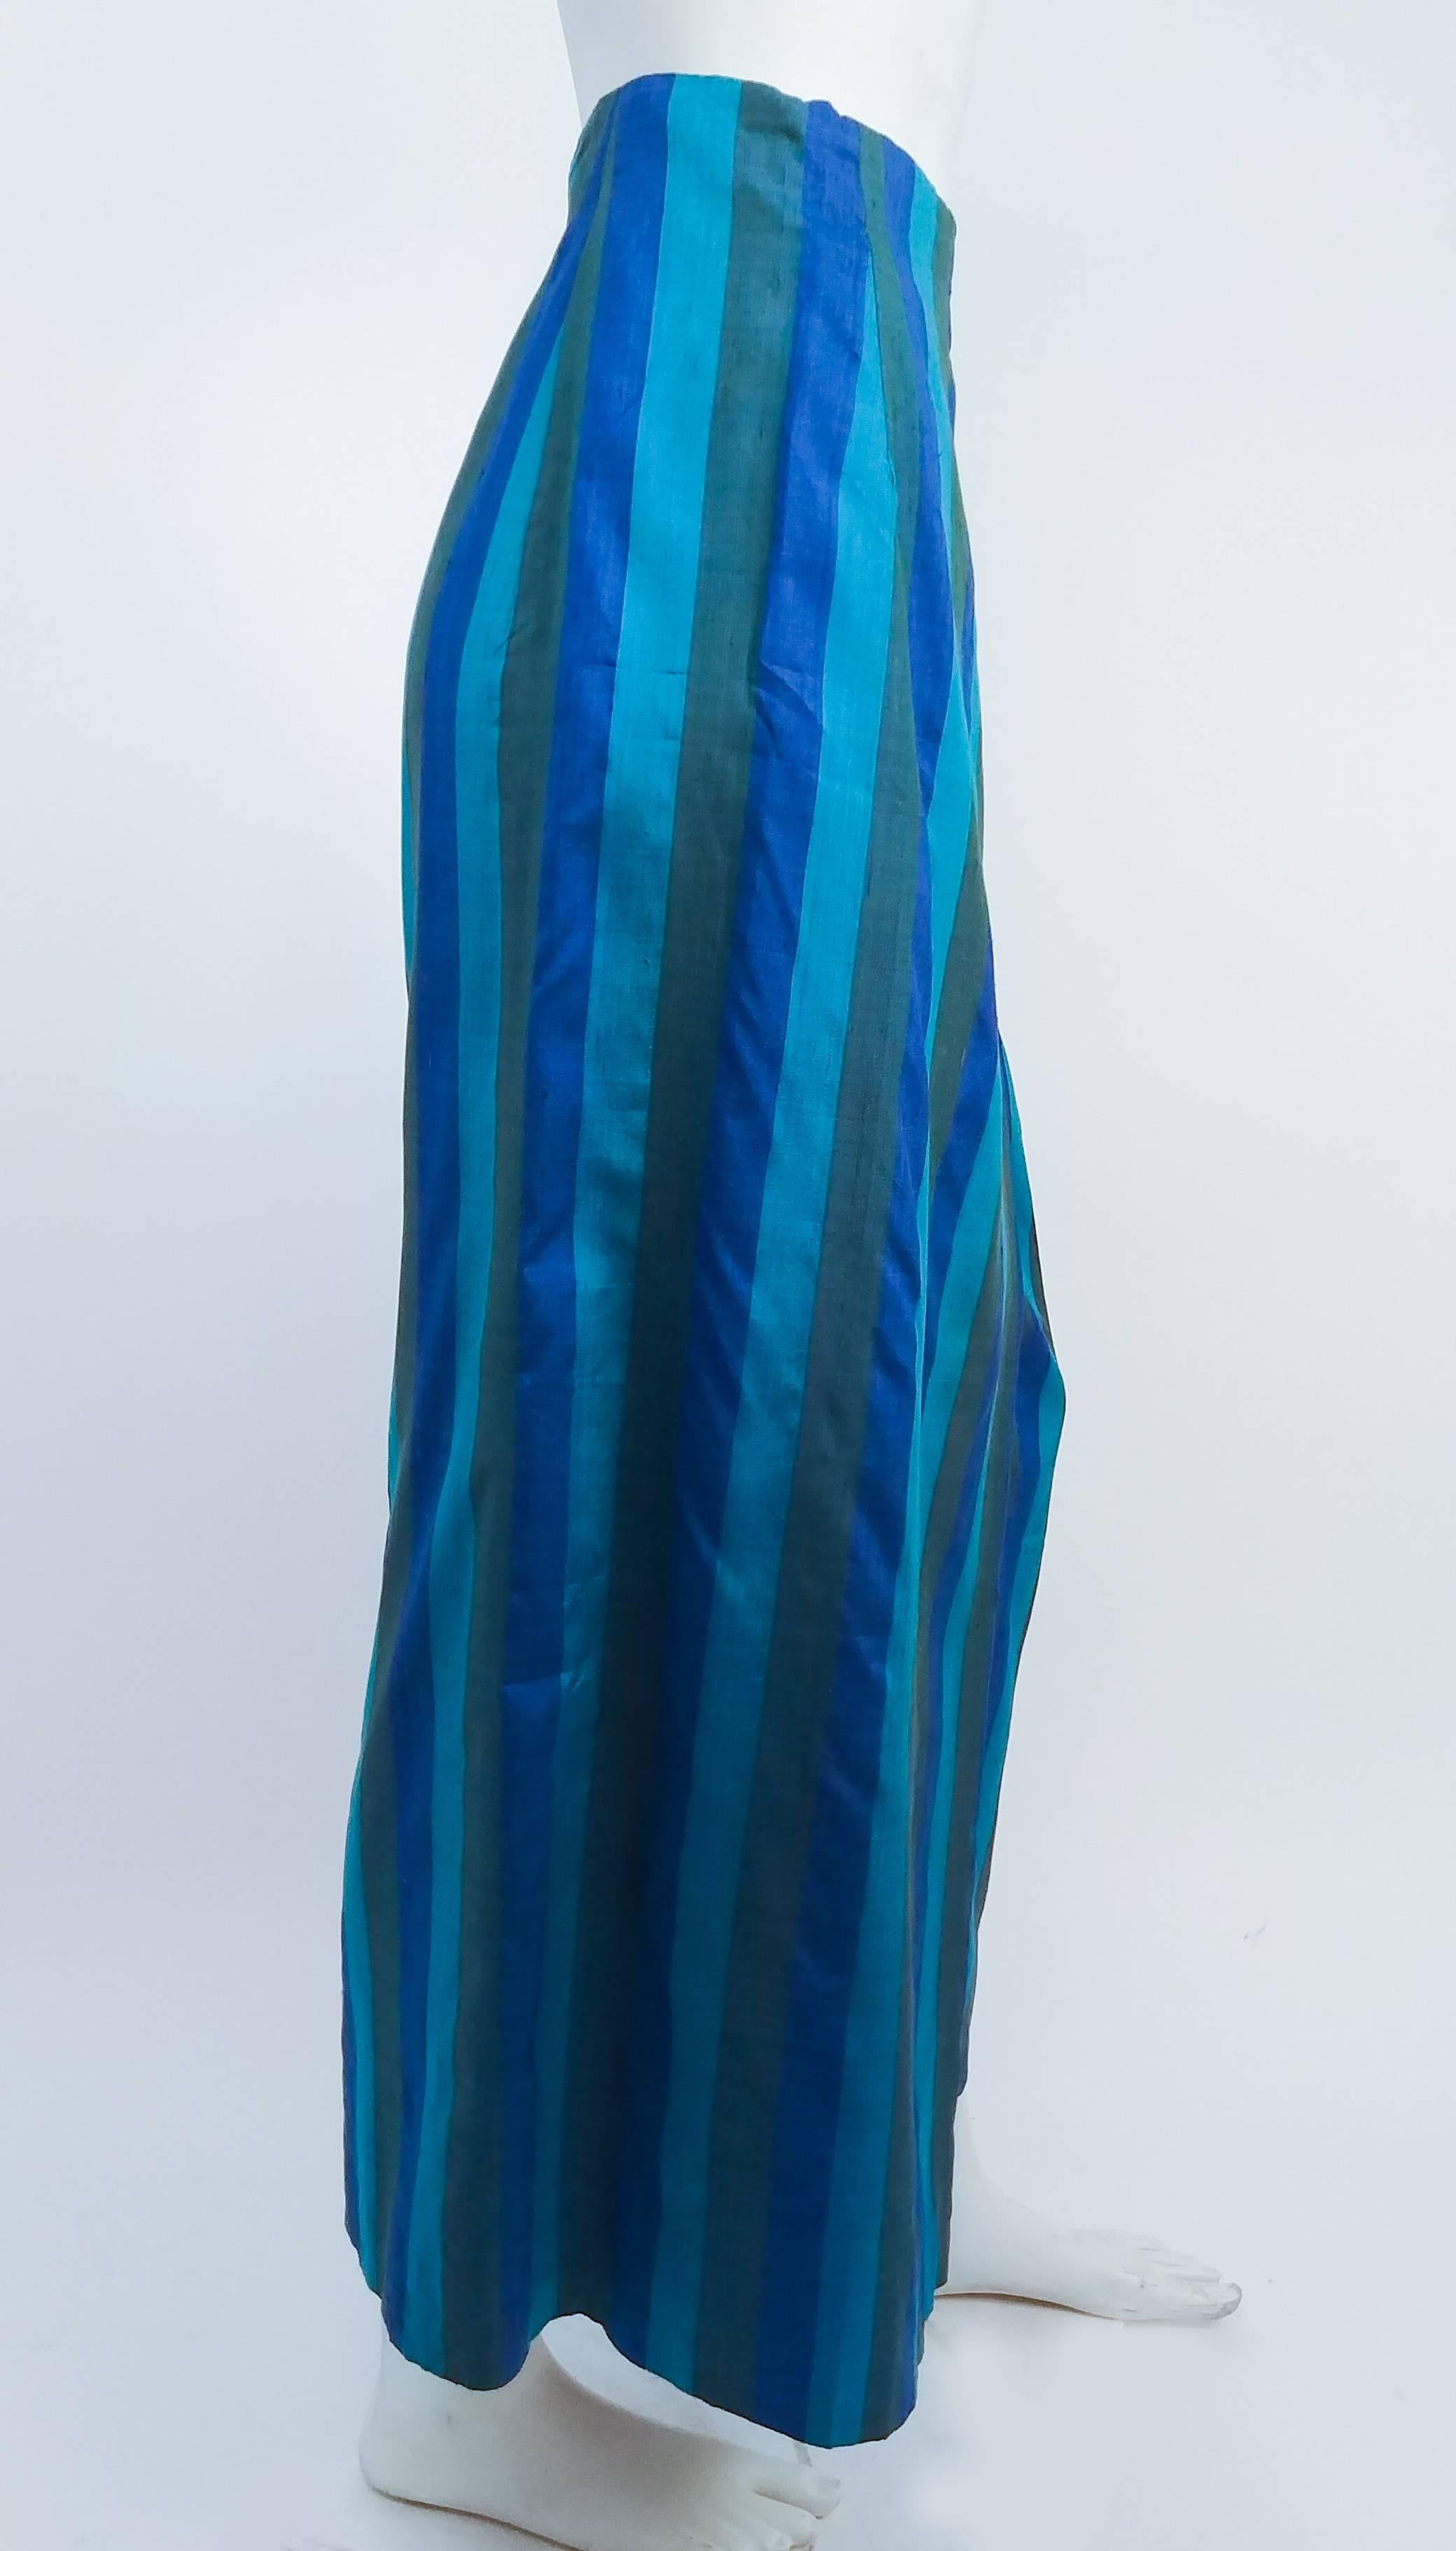 1960s Striped Shantung Wrap Skirt. Blue and green vertical stripes. Lined in cotton. Darted all along waist to give definition to hips. Fastens with hooks and eyes. 